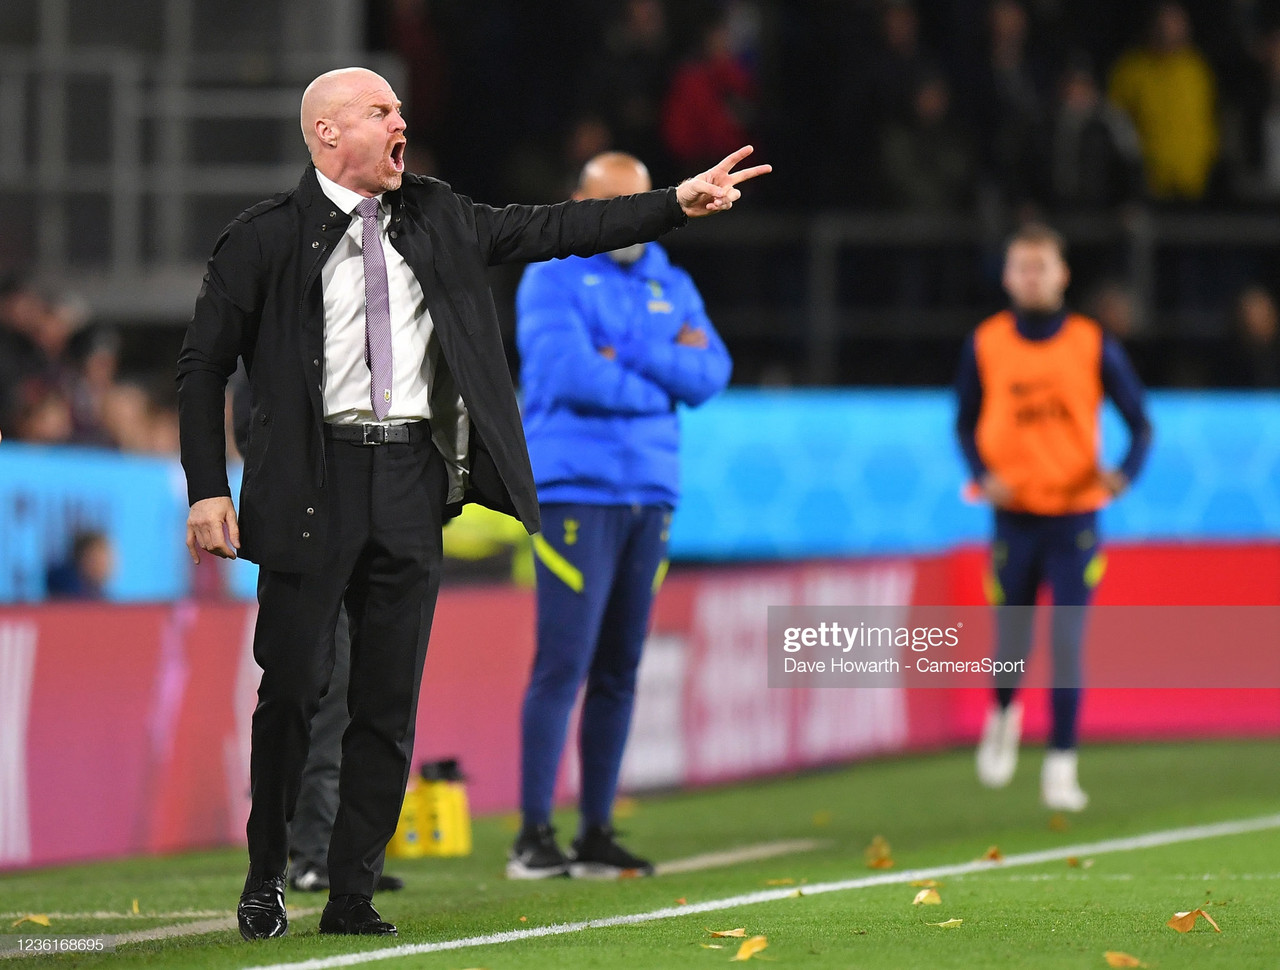 4 key points from Sean Dyche's press-conference